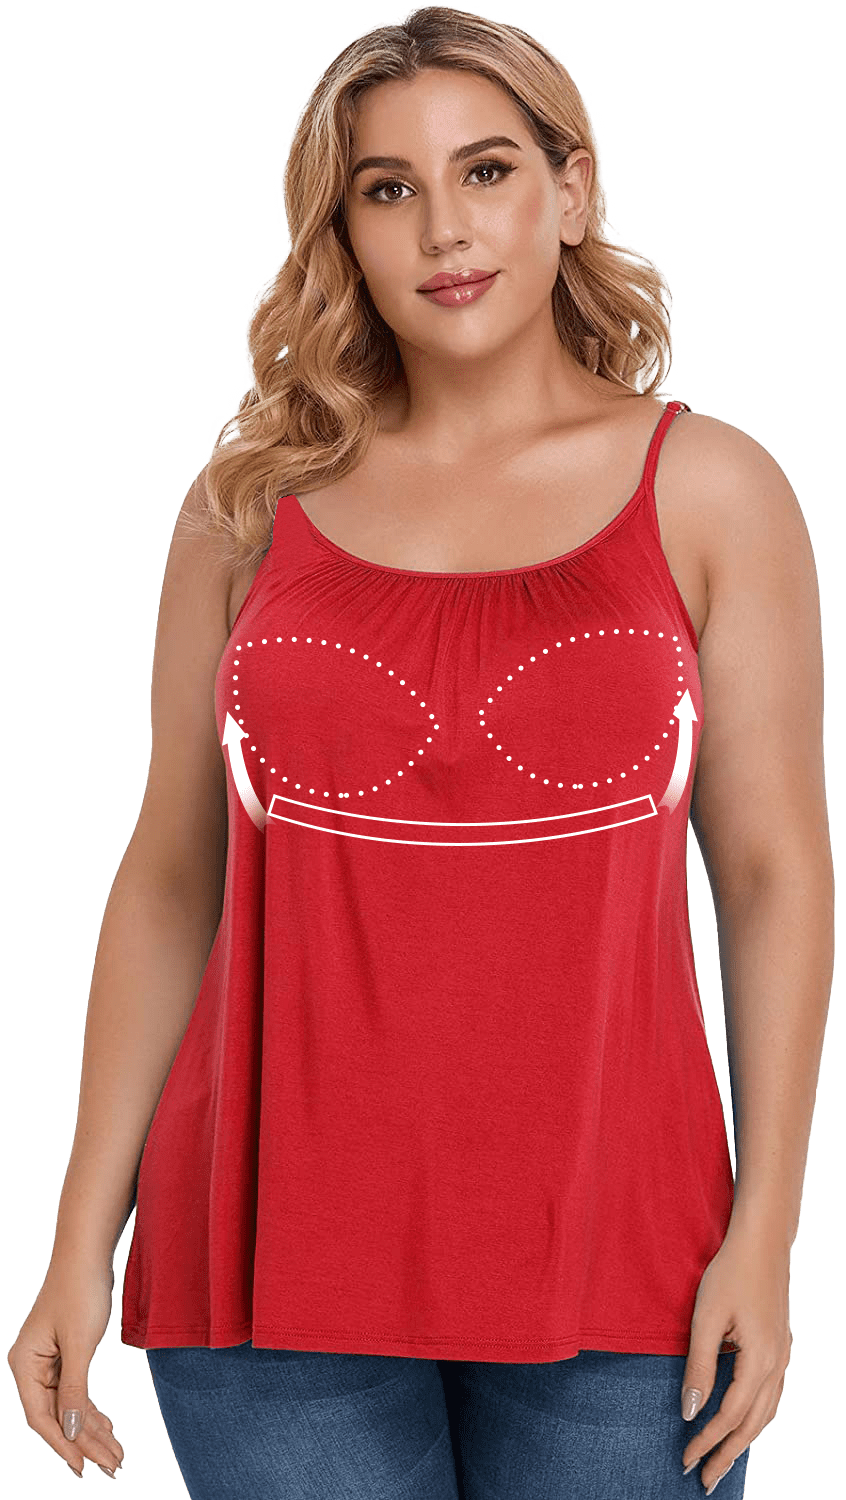 COMFREE Camisole with build in bra for Women Plus Size Adjustable Spaghetti  Straps Flowy Tank Top Casual Cami (S-4XL)